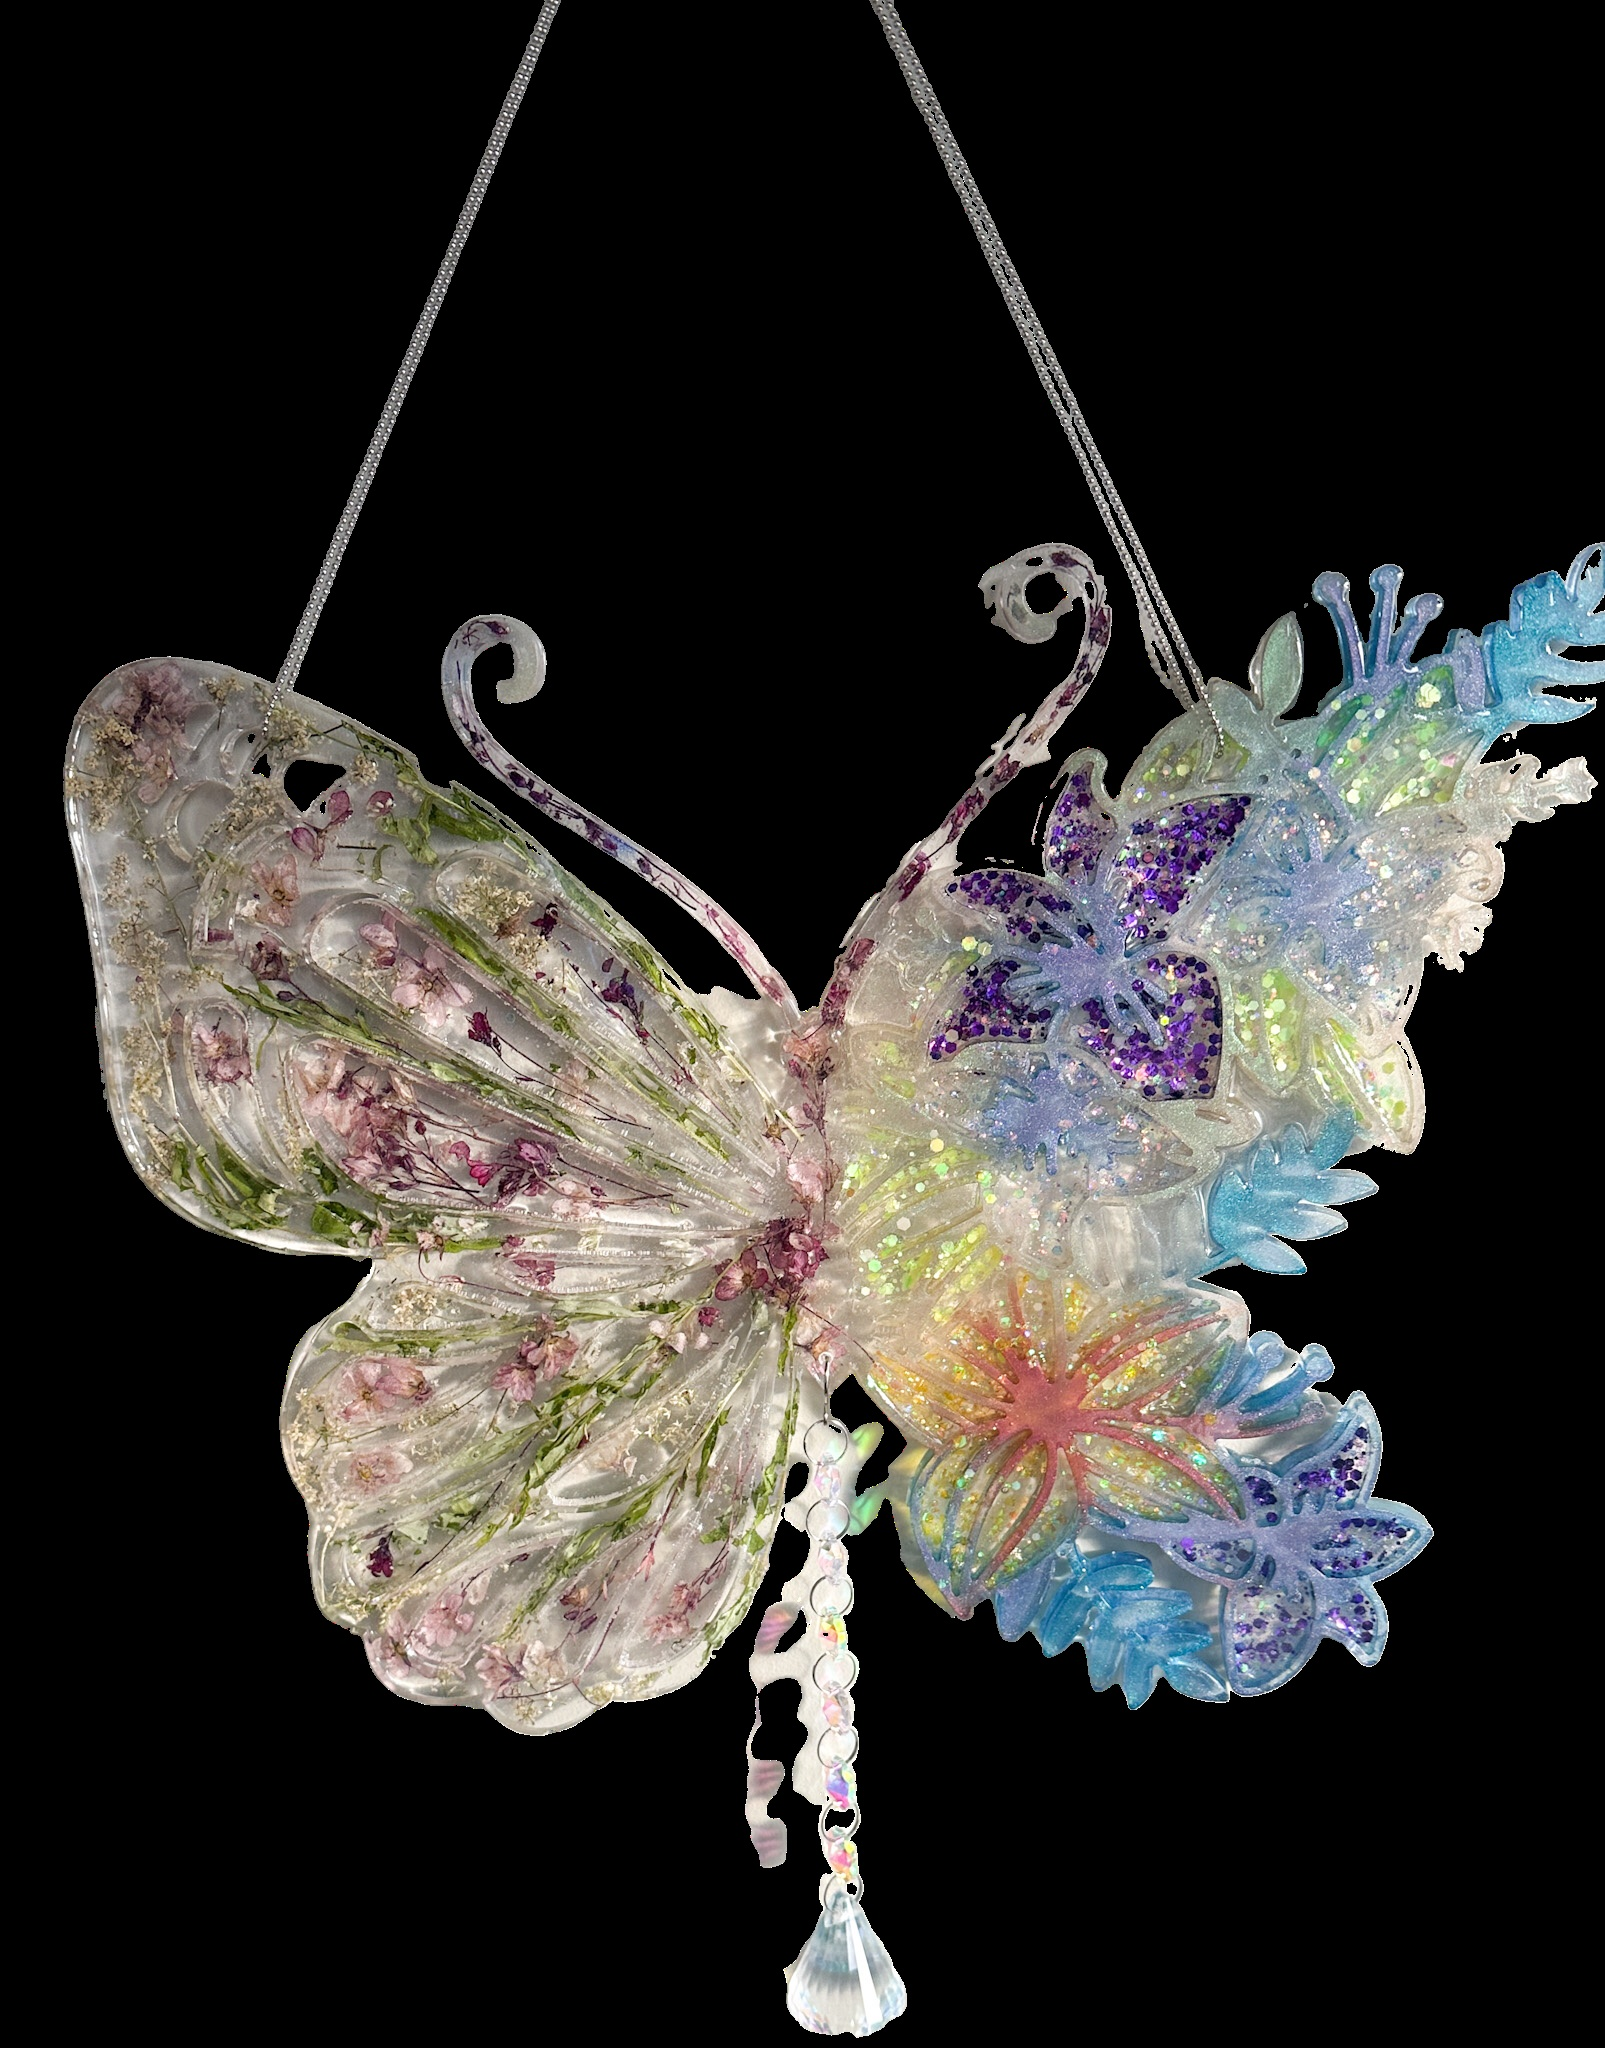 A large Butterfly created with Epoxy Resin with one half filled with dried flowers and the other half filled with glitter and bright colours. A prism crystal ball pendant hangs from the butterfly